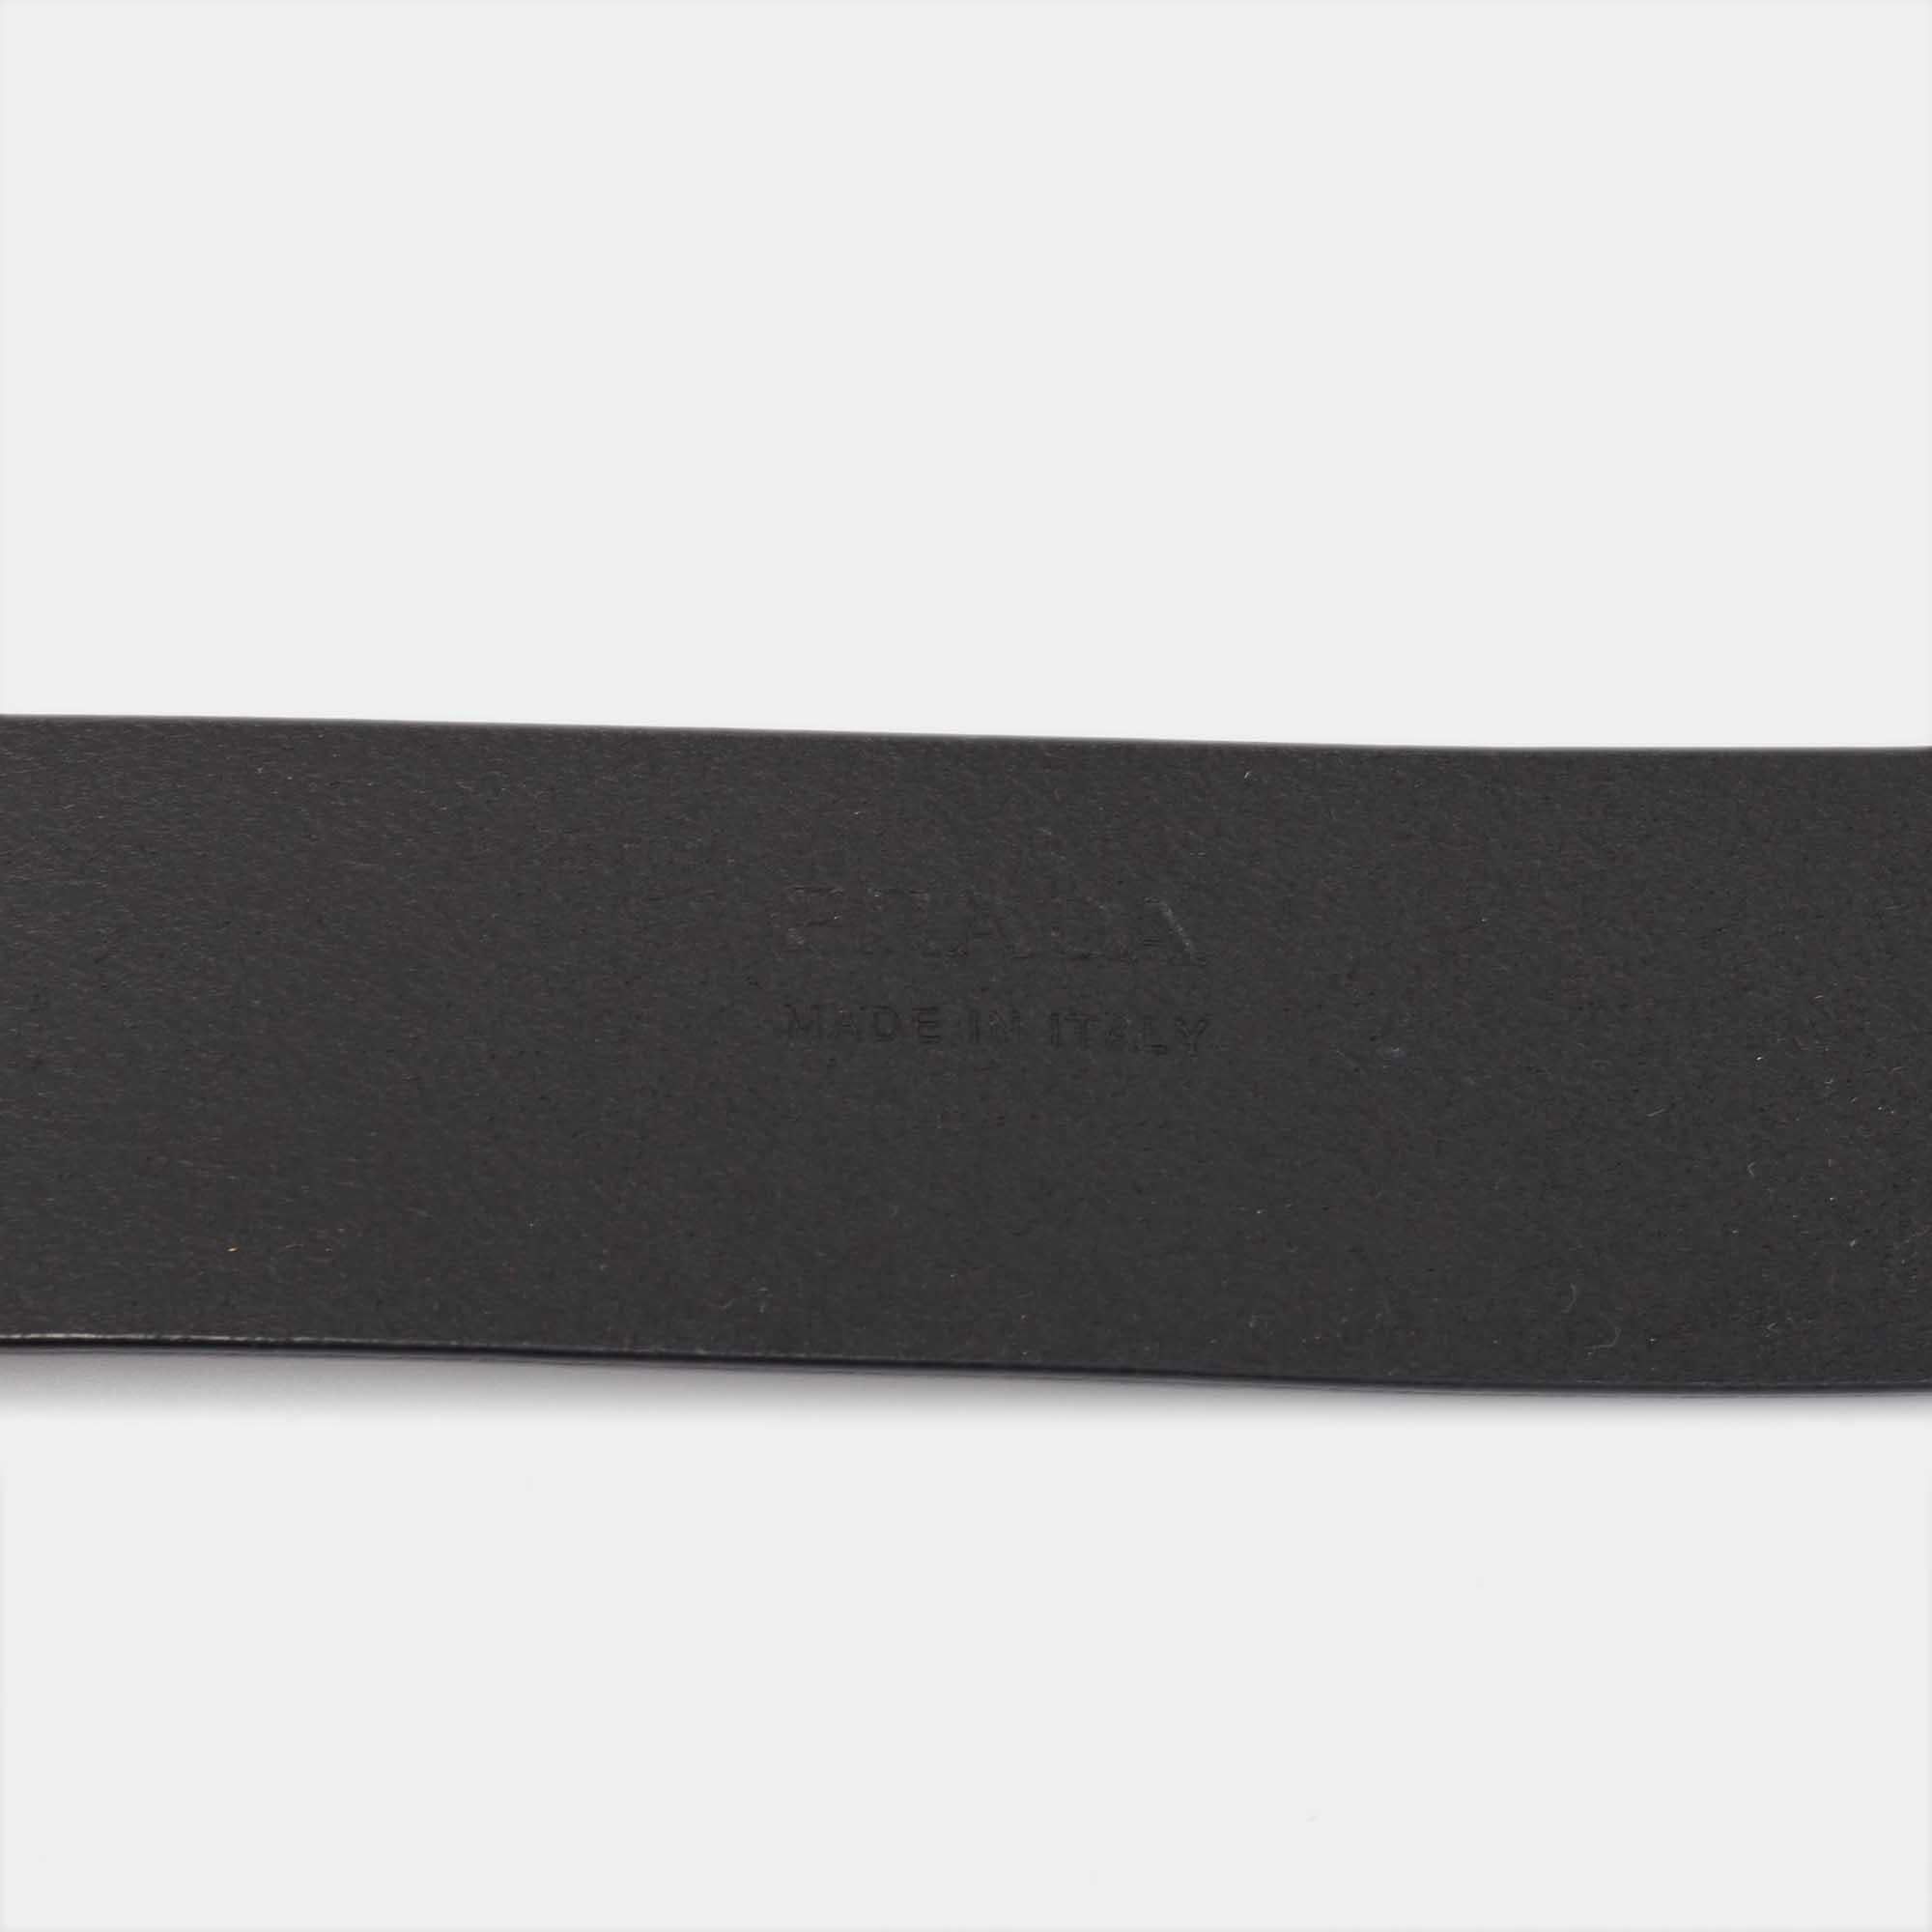 Presenting a Prada belt that has been crafted to be durable and to suit all your refined looks. High in durability and appeal, this belt is a fine element of luxury.

